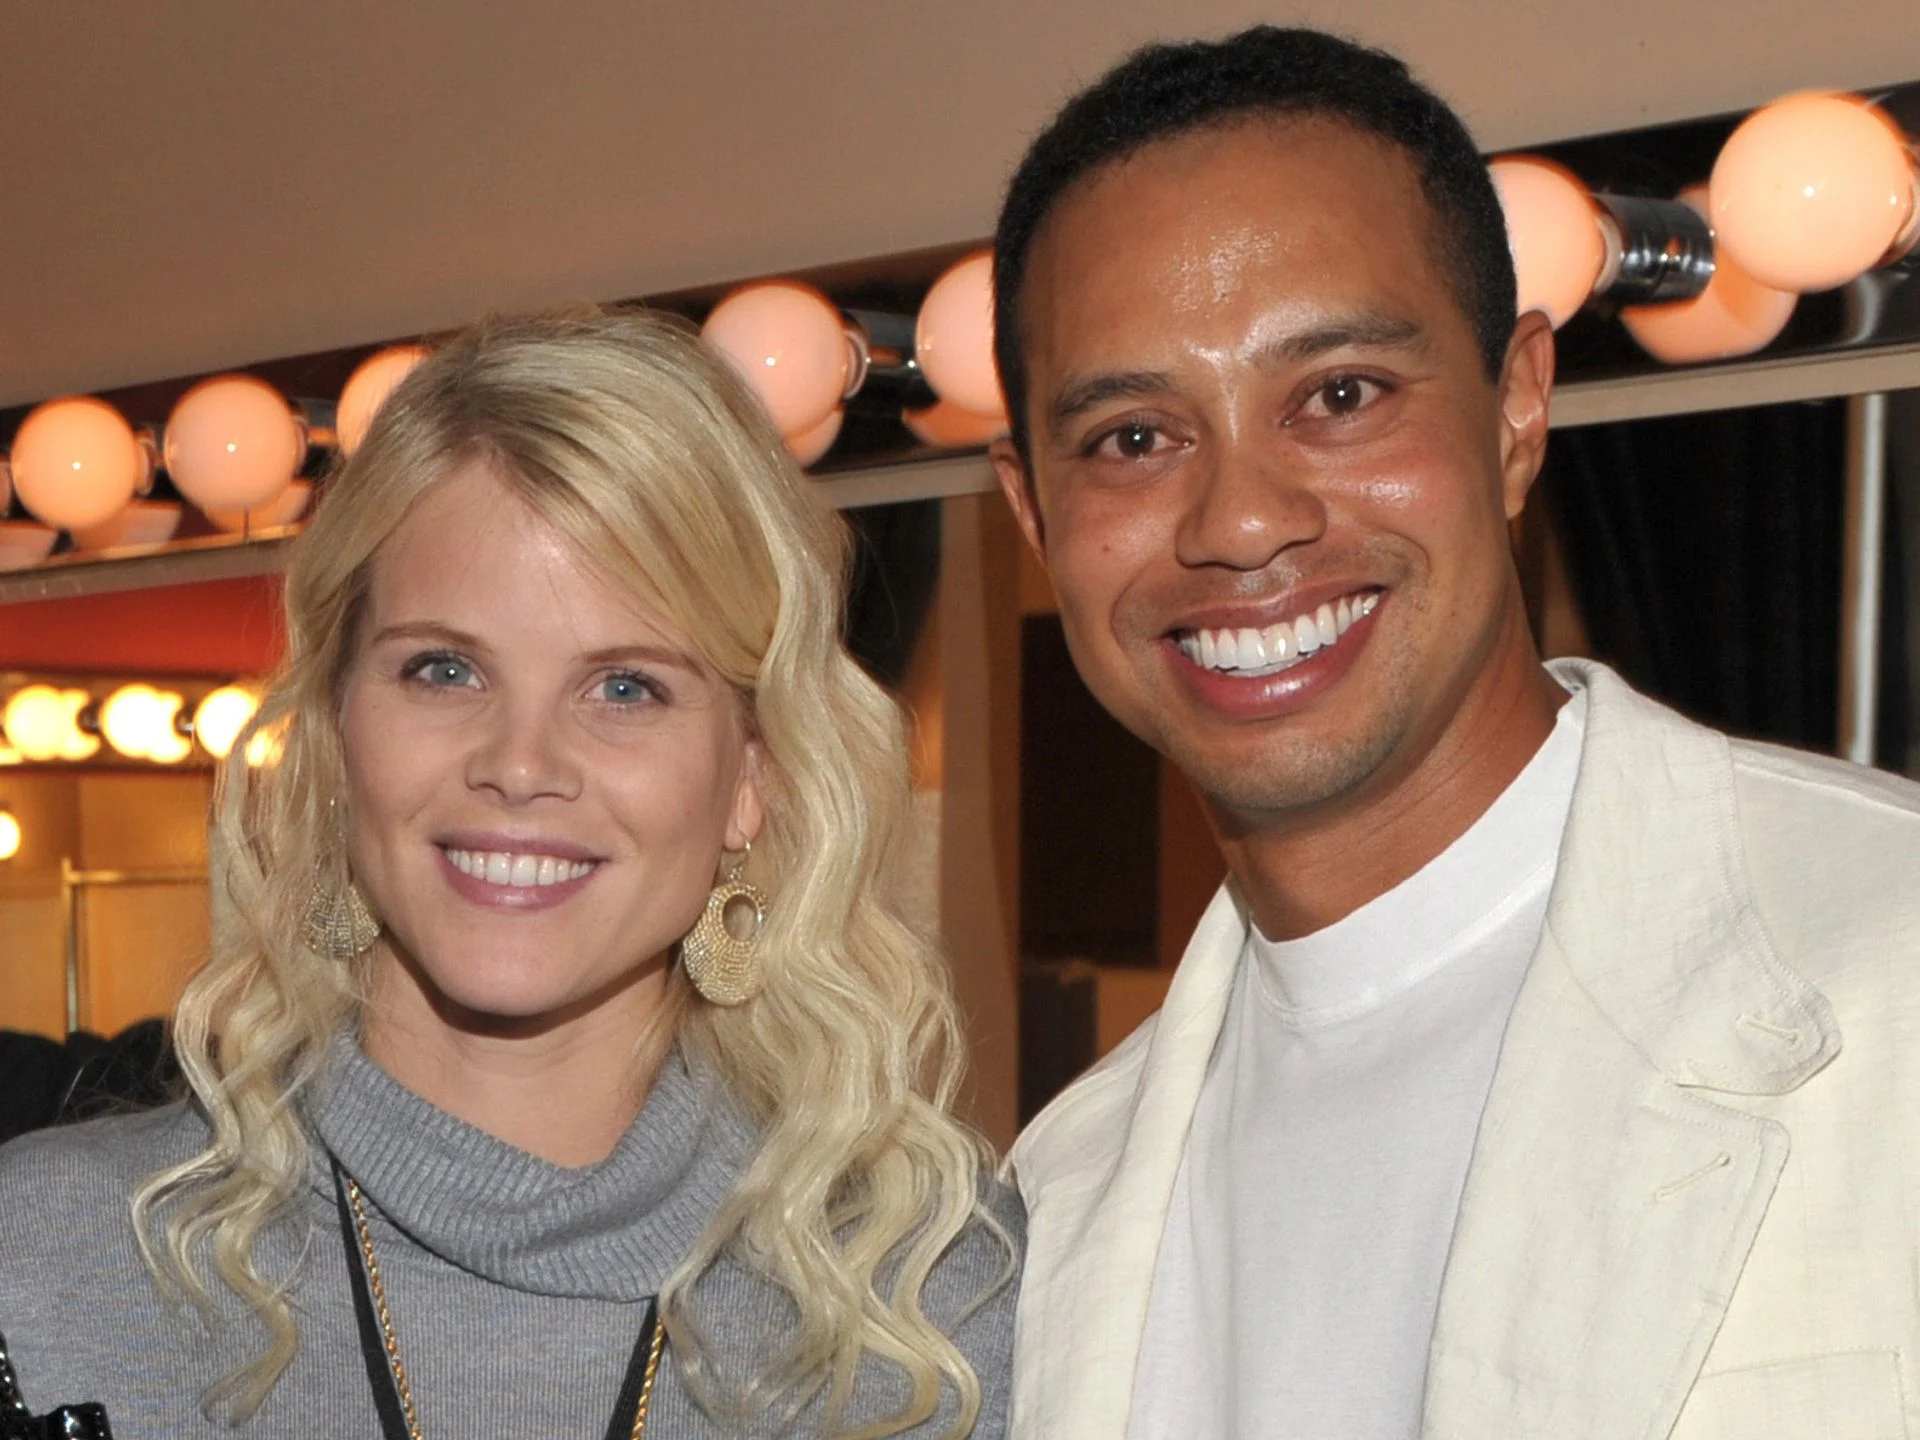 UNBELIEVEABLE SAD NEWS: About a Minute Ago, TIGER WOODS EX WIFE Elin Nordegren Passes Away…. 